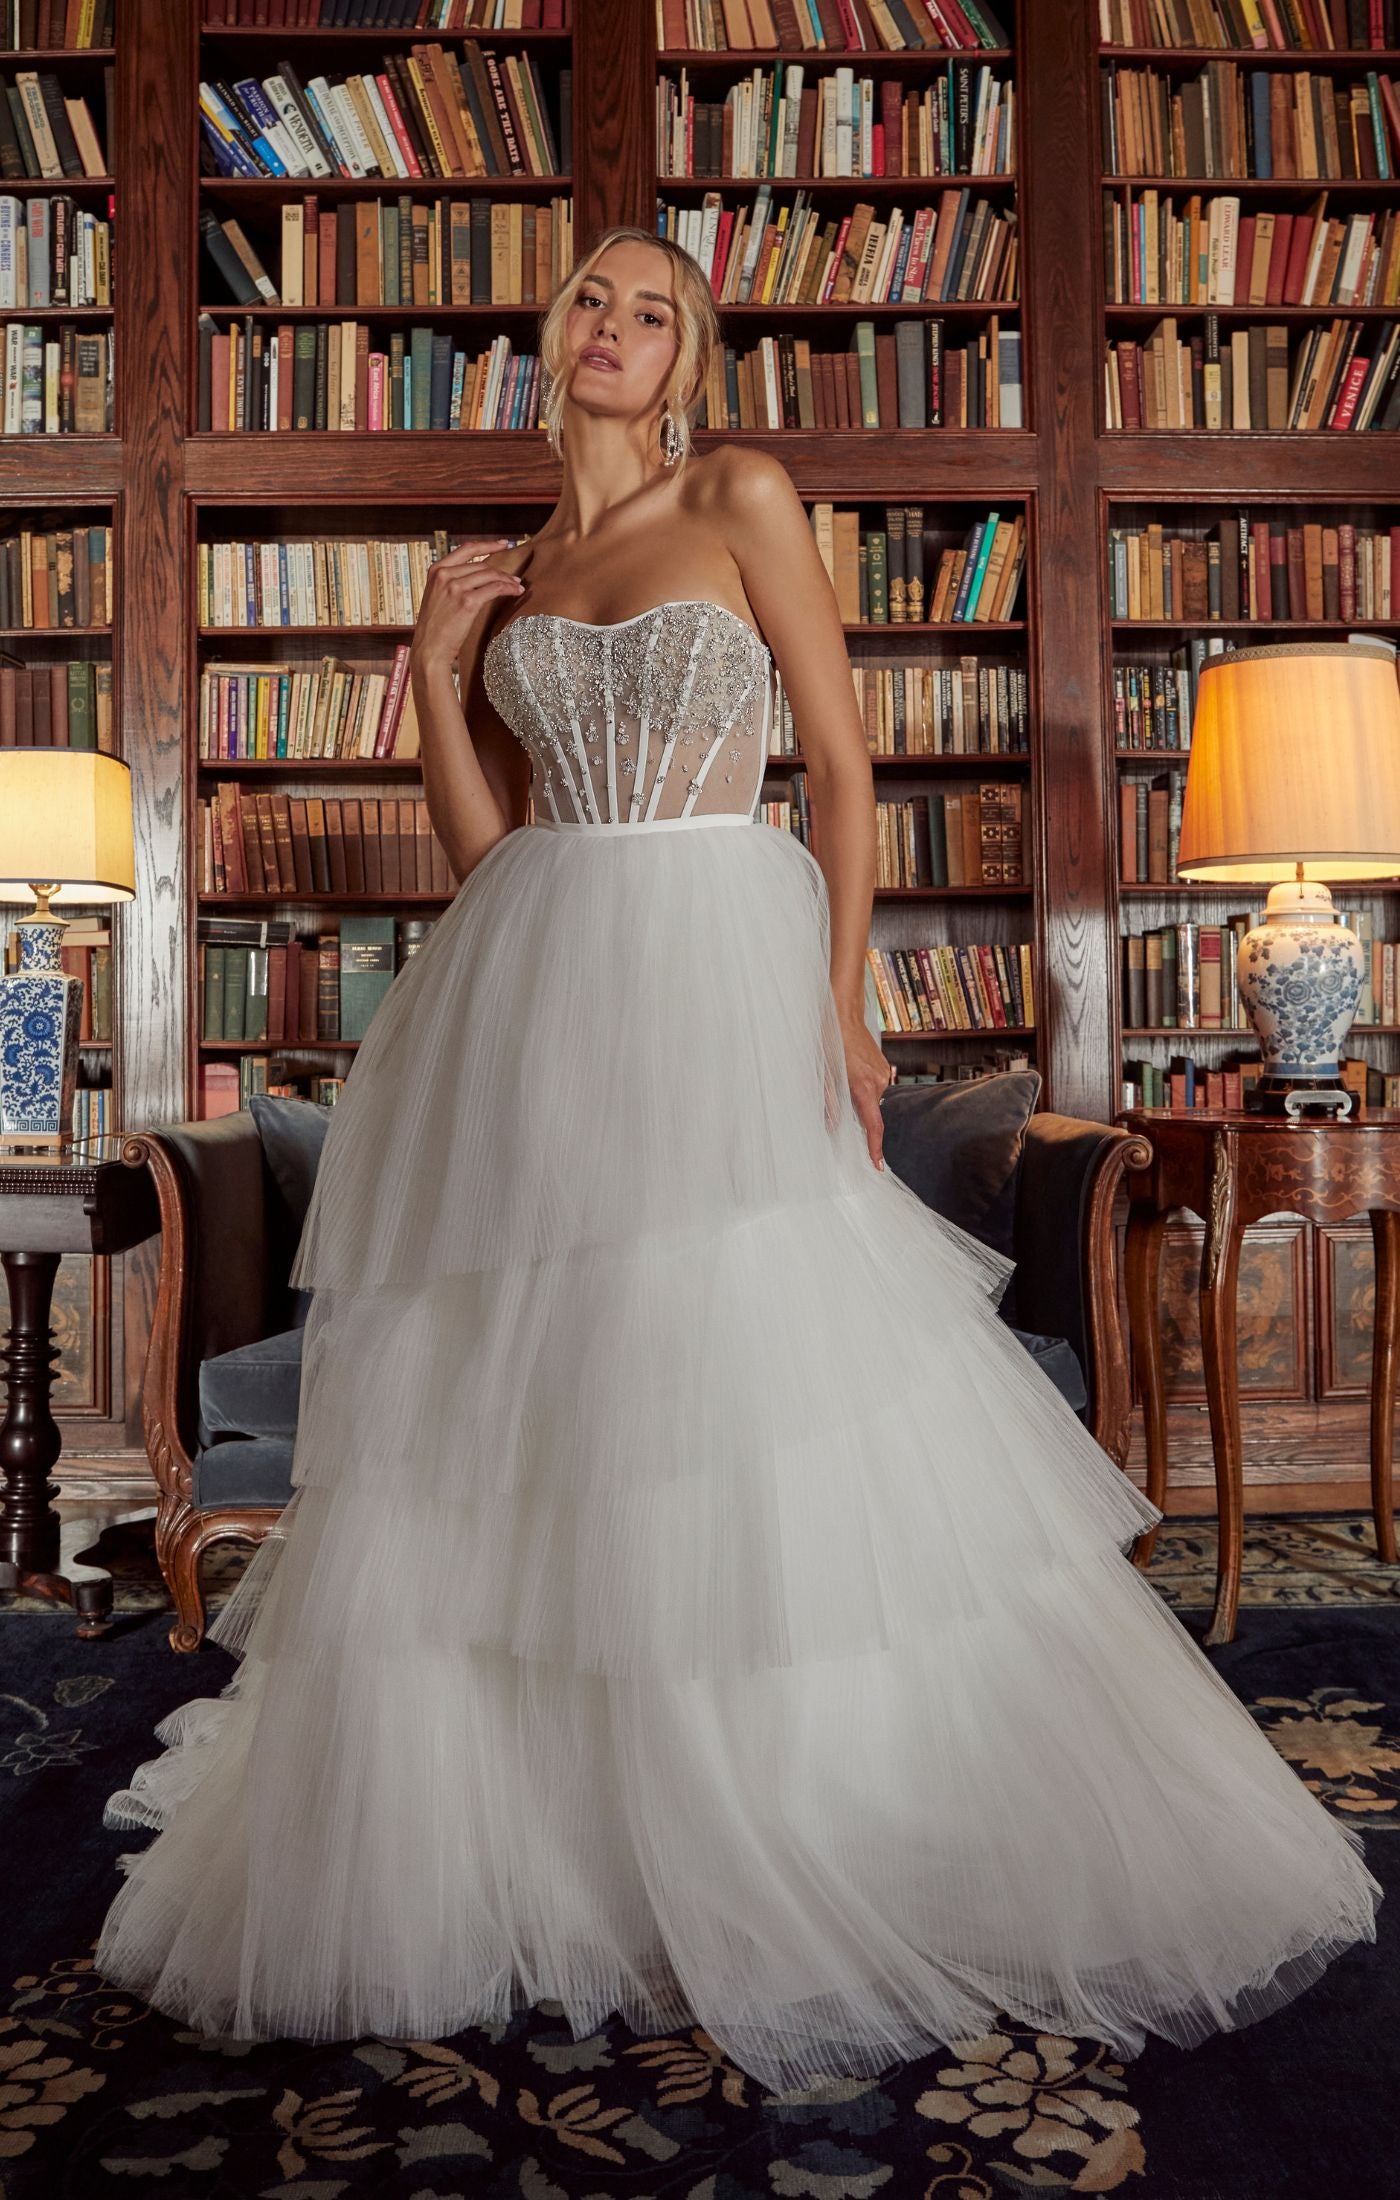 Casablanca Bridal 2558 Jewel A-Line Ballgown Strapless Sheer Corset Sweetheart Neckline Tulle Tier Train Wedding Gown. Step into a world of timeless glamour with our stunning A-line wedding dress, Style 2558 Jewel. This exquisite gown is designed to make you feel like a true jewel on your special day, radiating elegance and grace. The strapless, modified sweetheart neckline of Jewel beautifully frames your face and shoulders, creating a romantic and feminine silhouette.